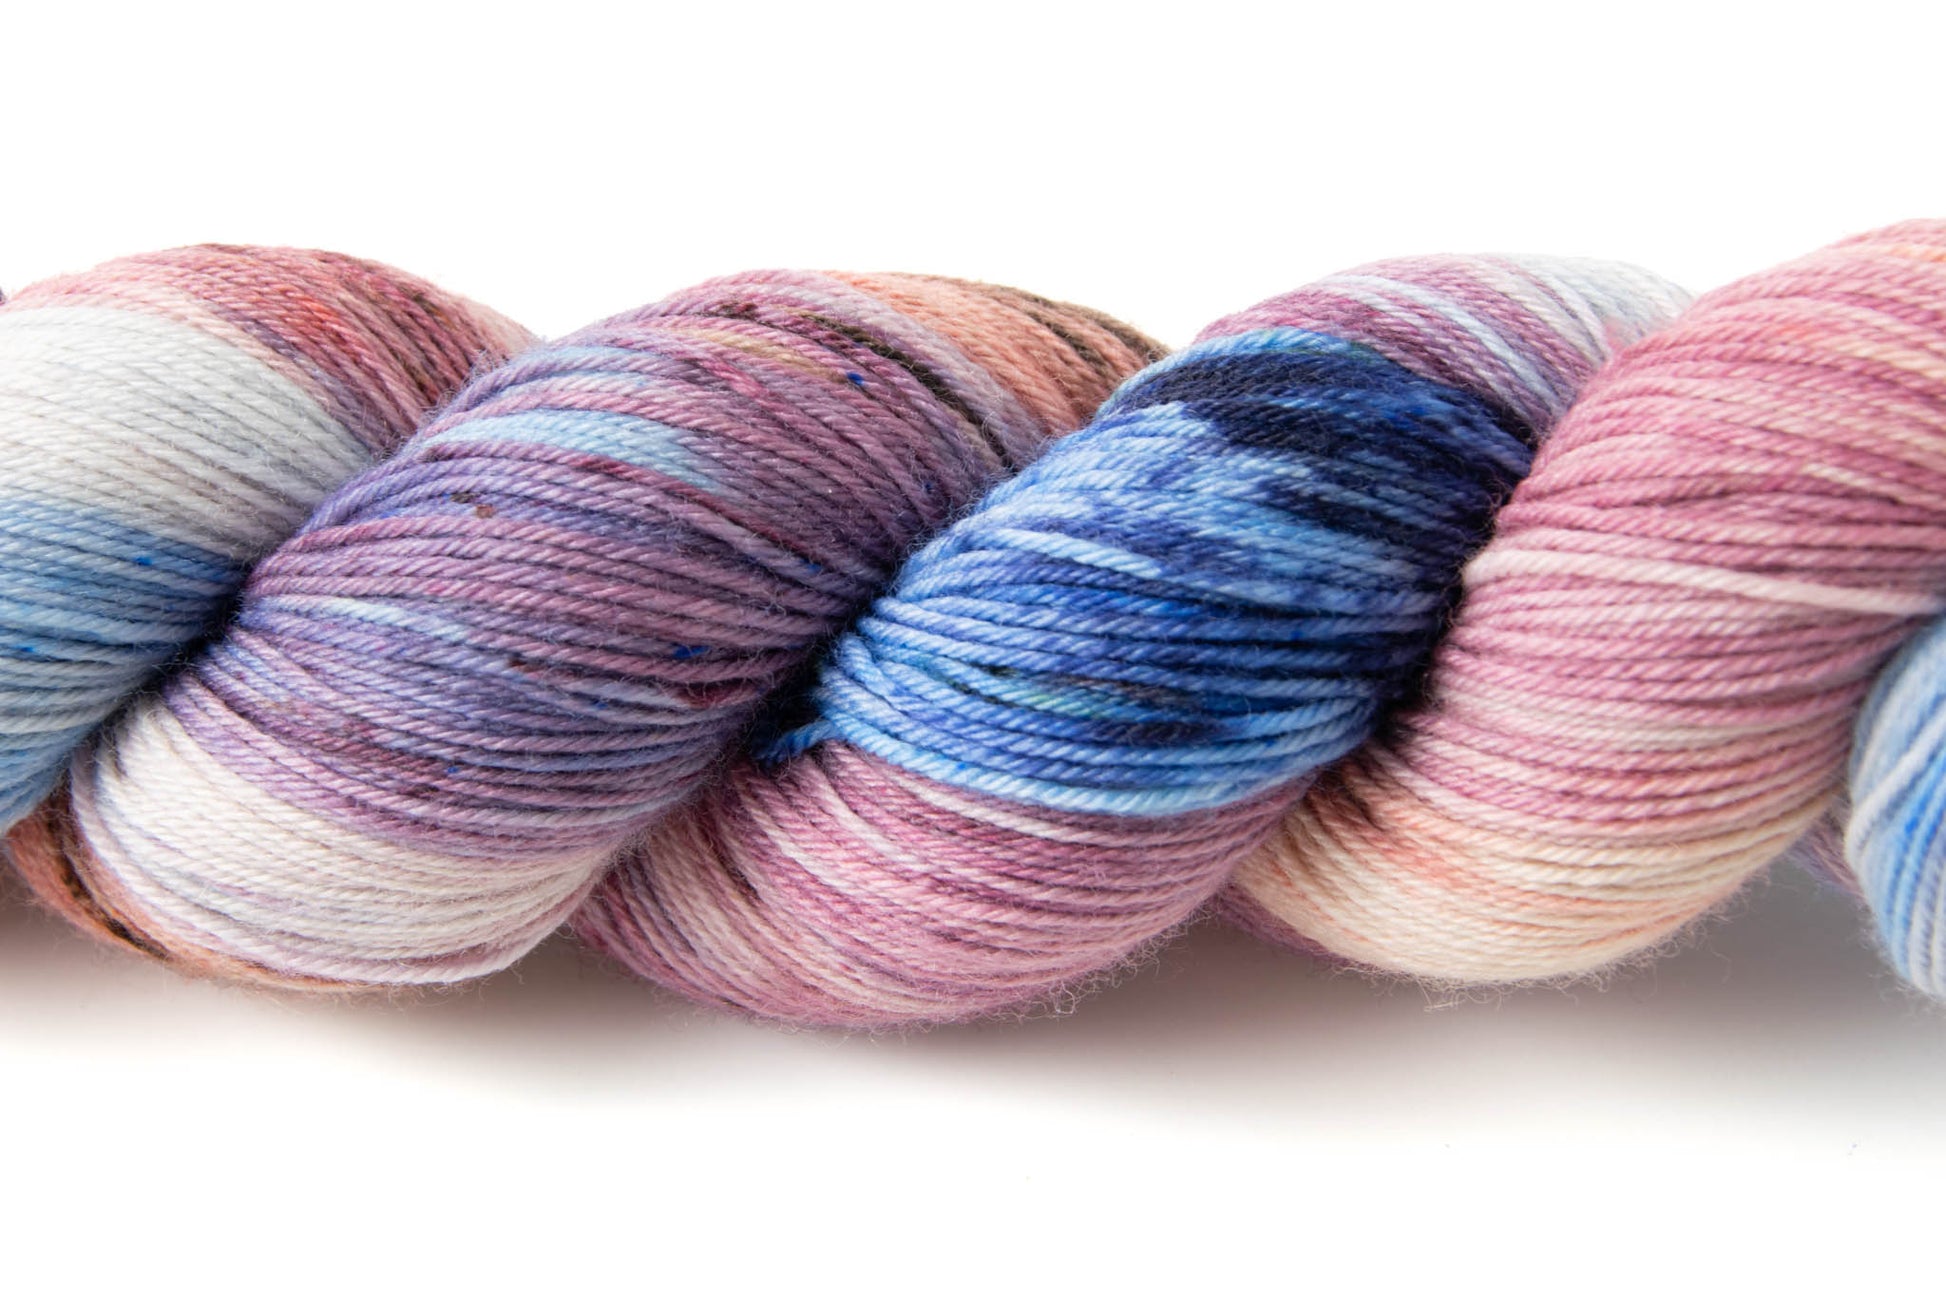 Close vies of the variegated nature of the yarn ad the small speckles of color on top of the larger swathes of color.